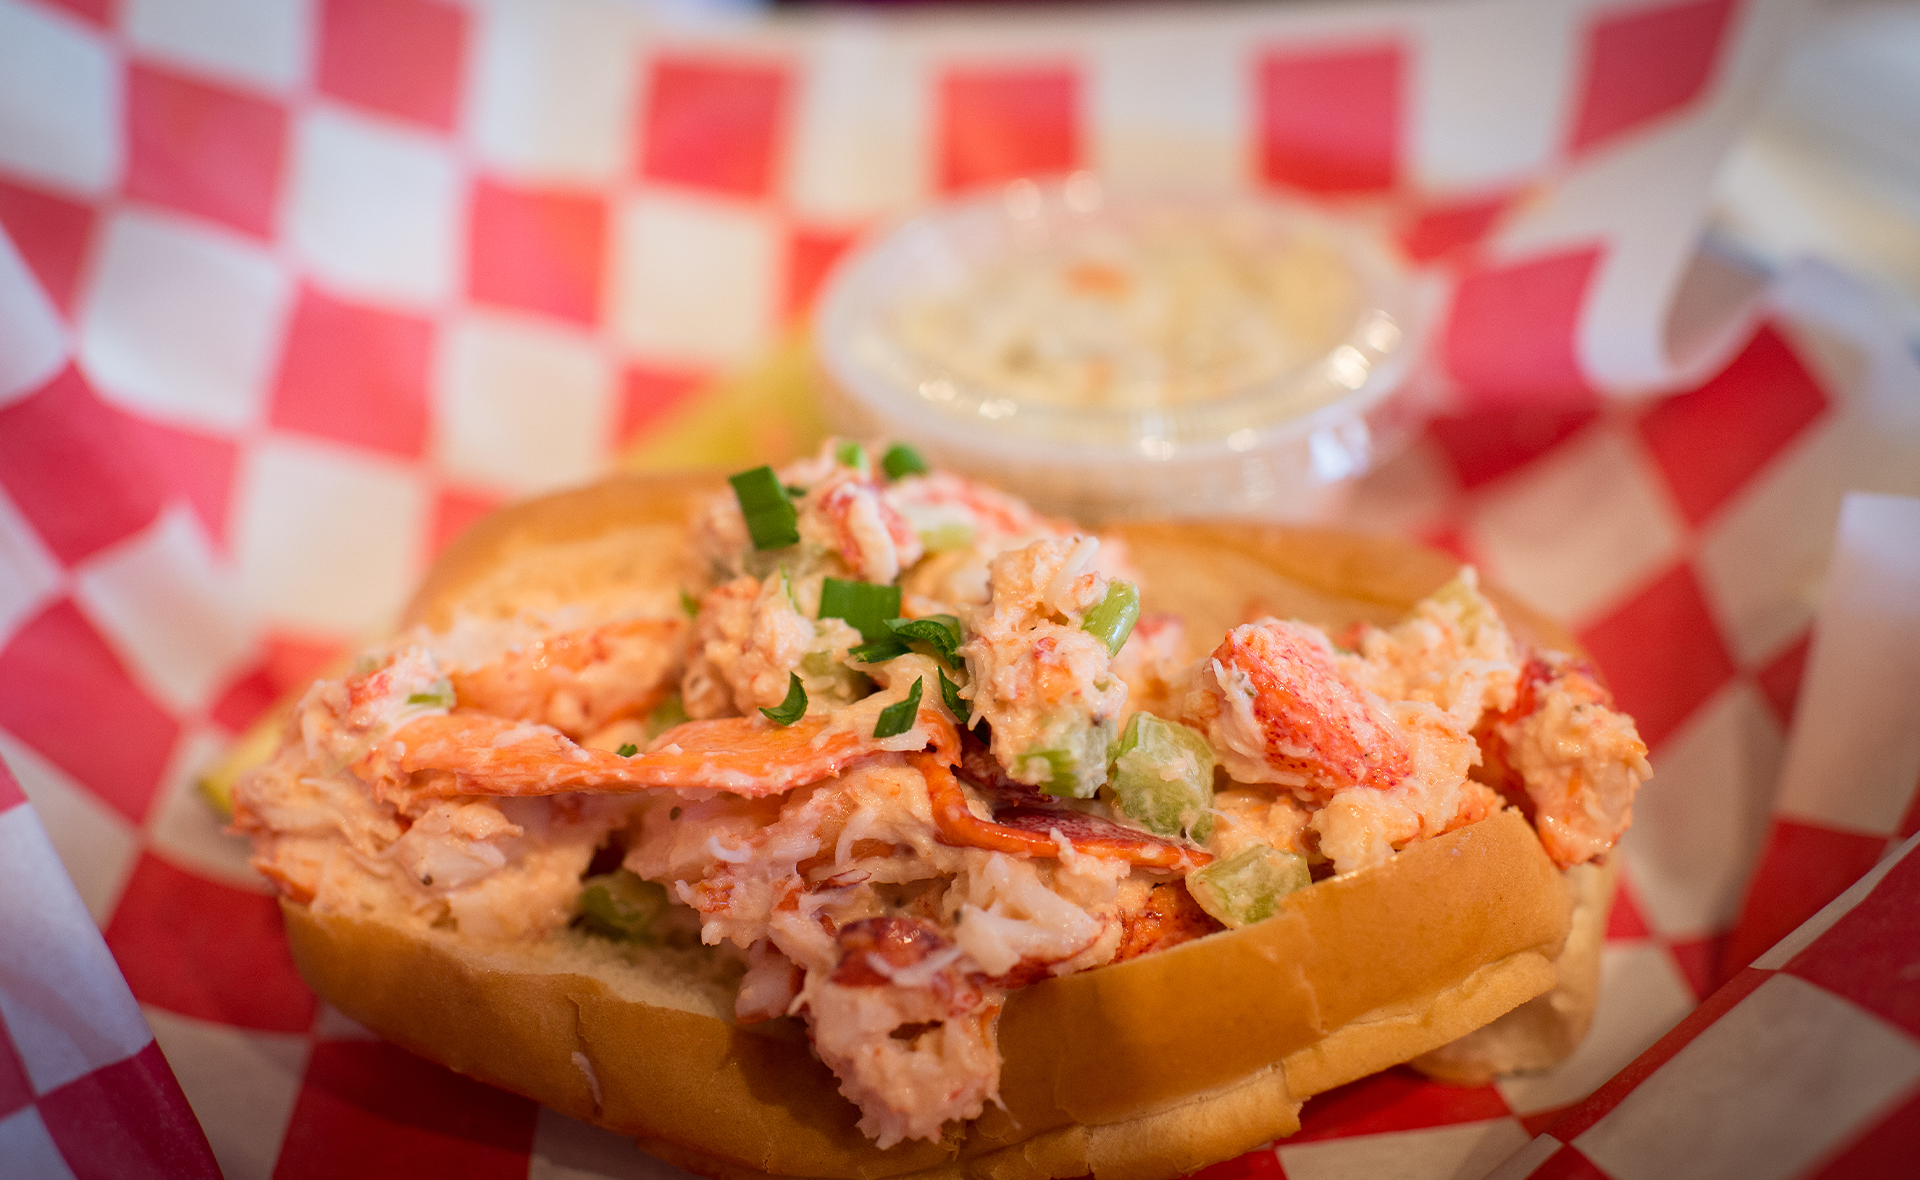 Lobster Rolls and French Onion Soup Today 6/29/22!